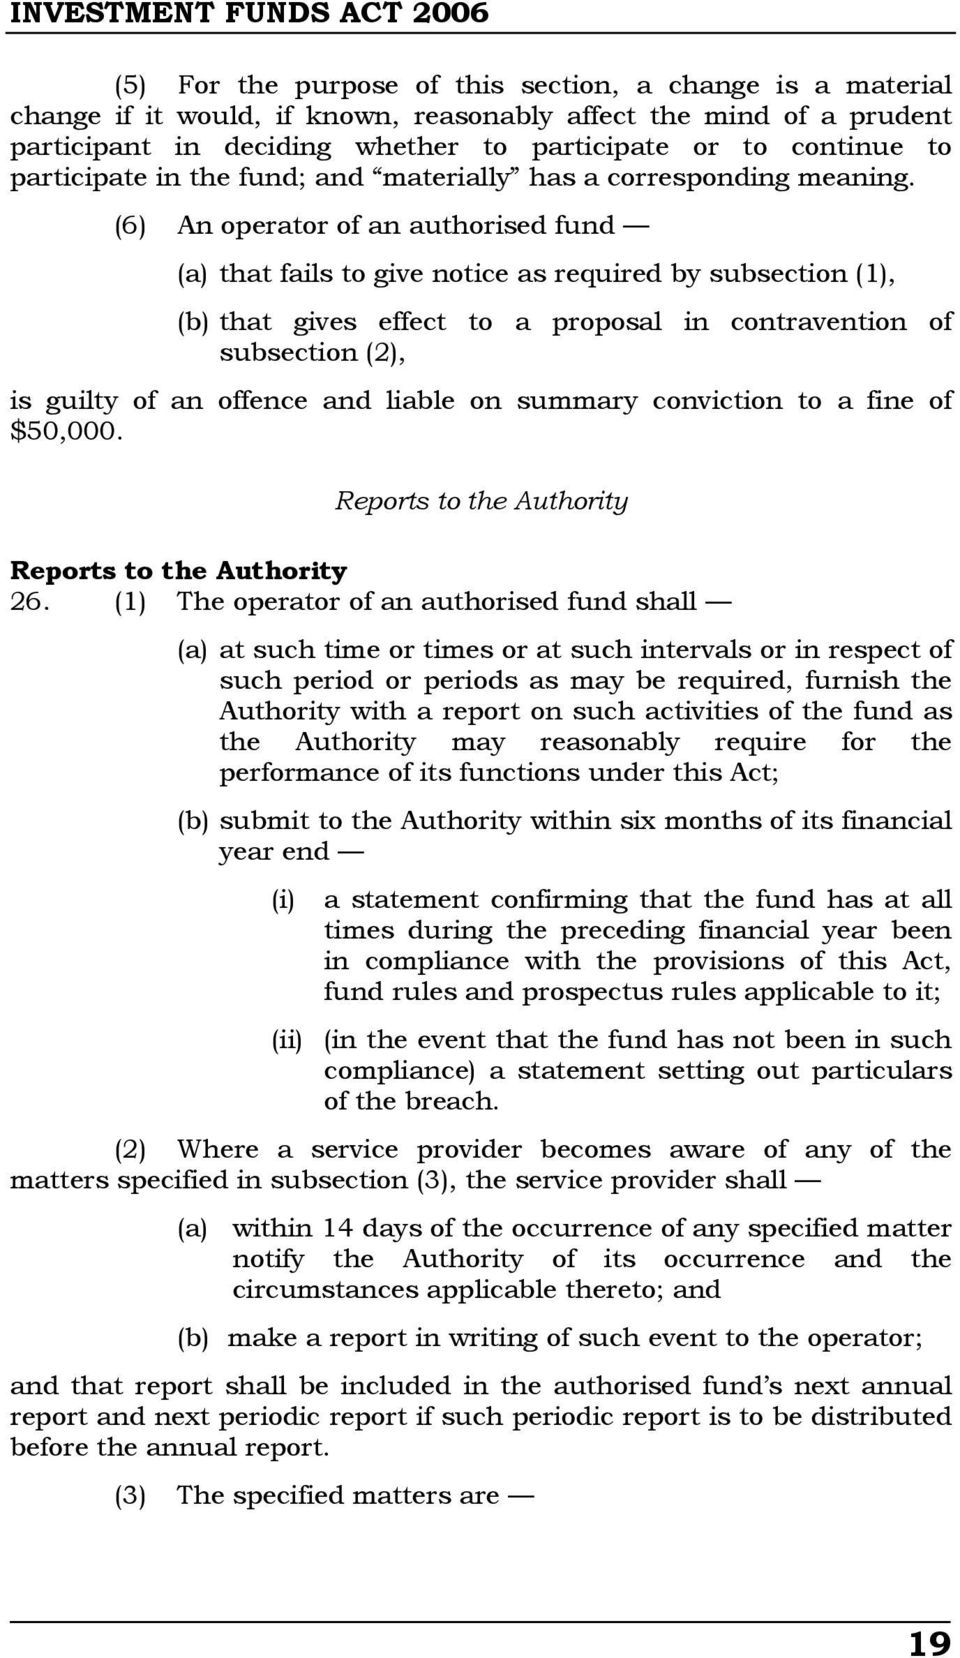 (6) An operator of an authorised fund (a) that fails to give notice as required by subsection (1), (b) that gives effect to a proposal in contravention of subsection (2), is guilty of an offence and